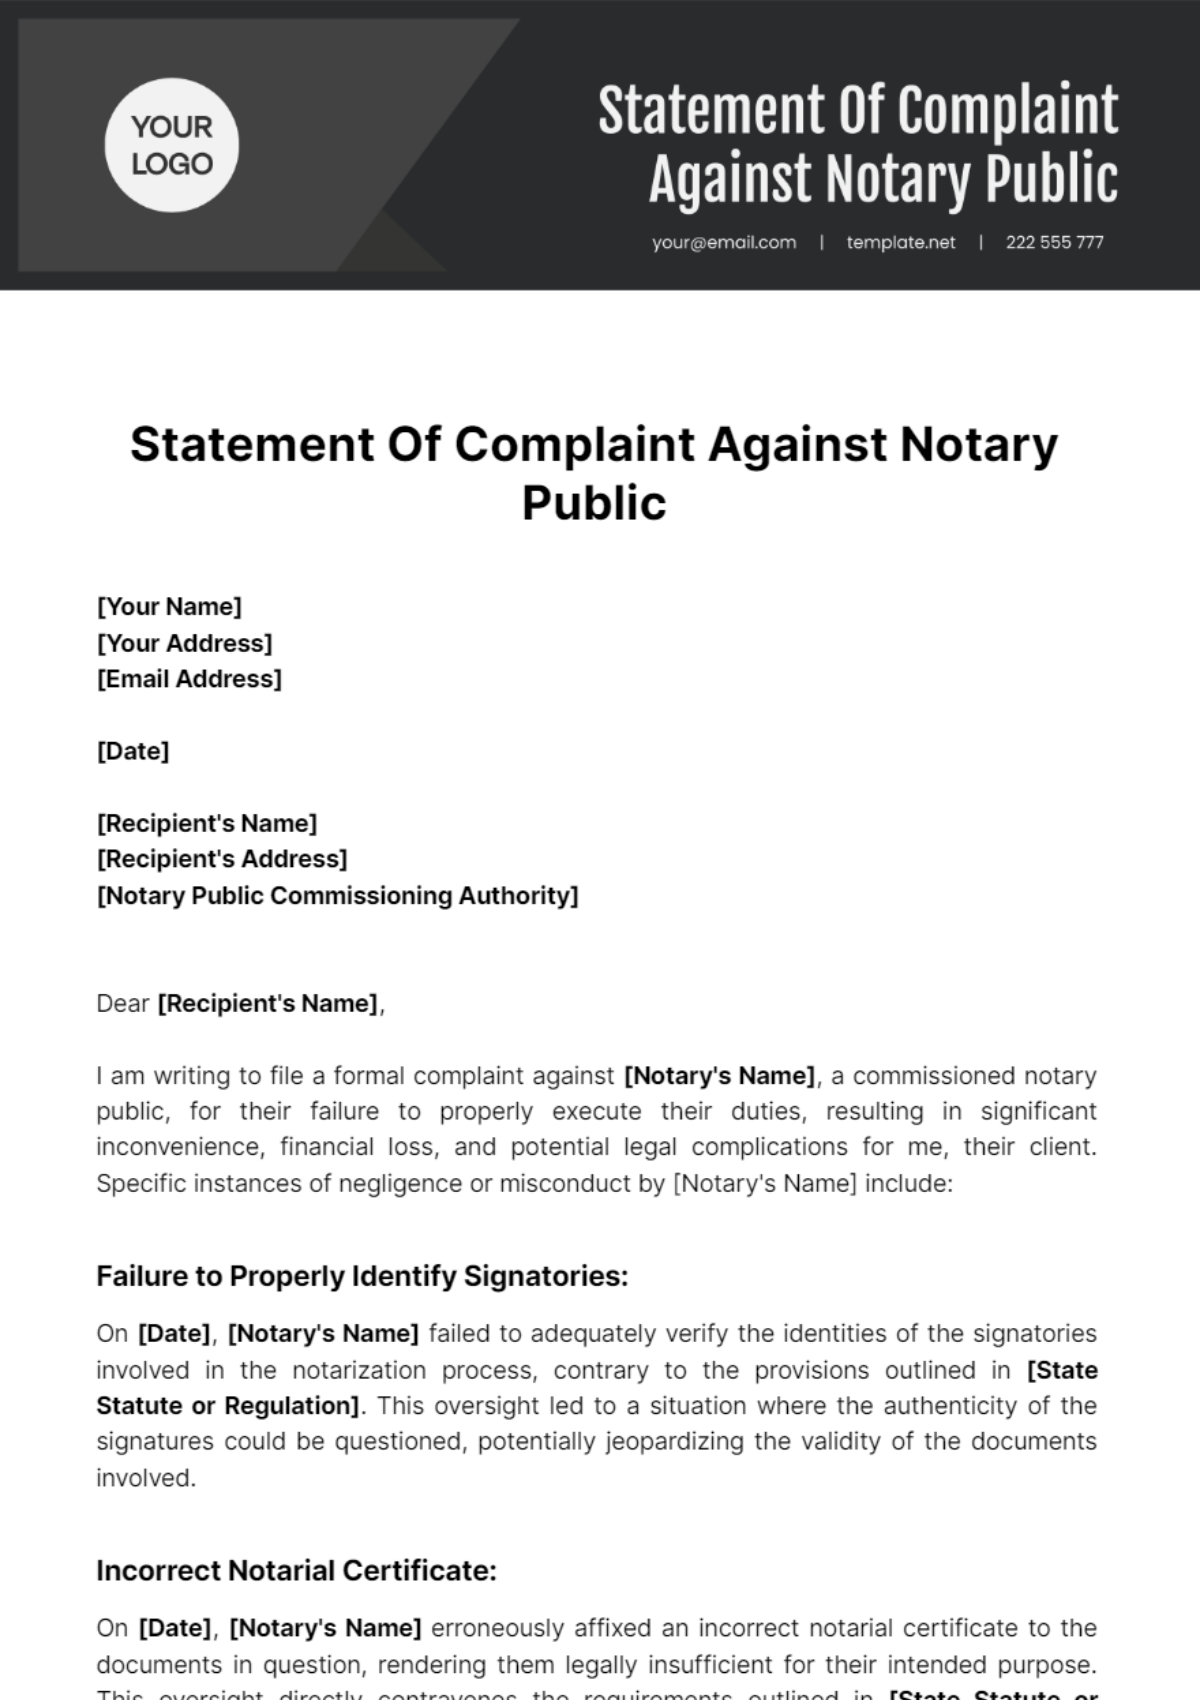 Statement Of Complaint Against Notary Public Template